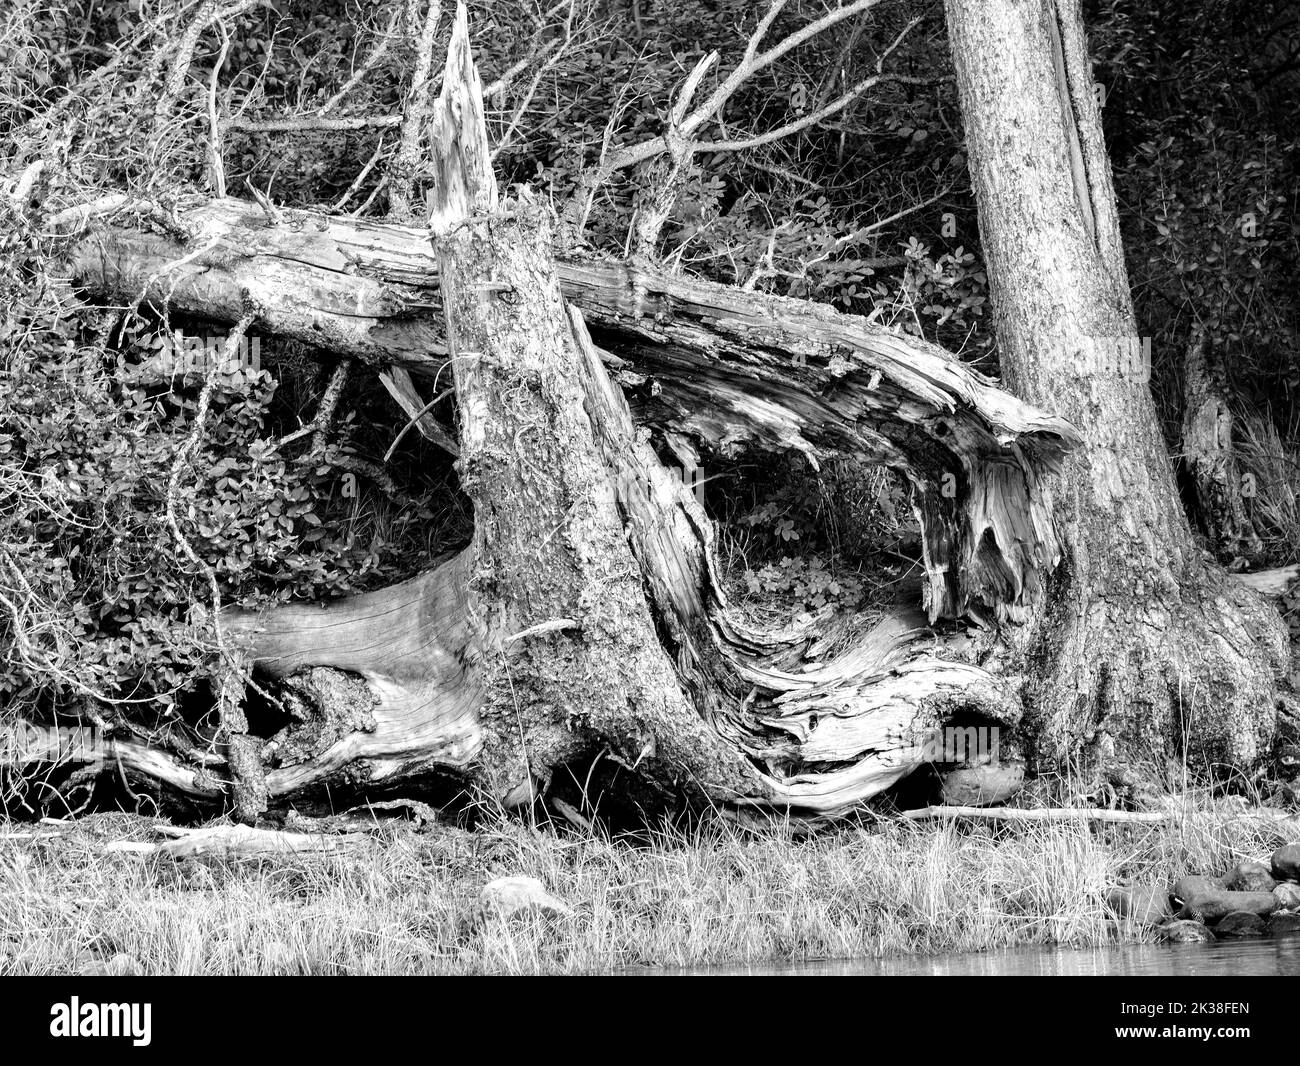 Dead, bleached trees in B&W Stock Photo